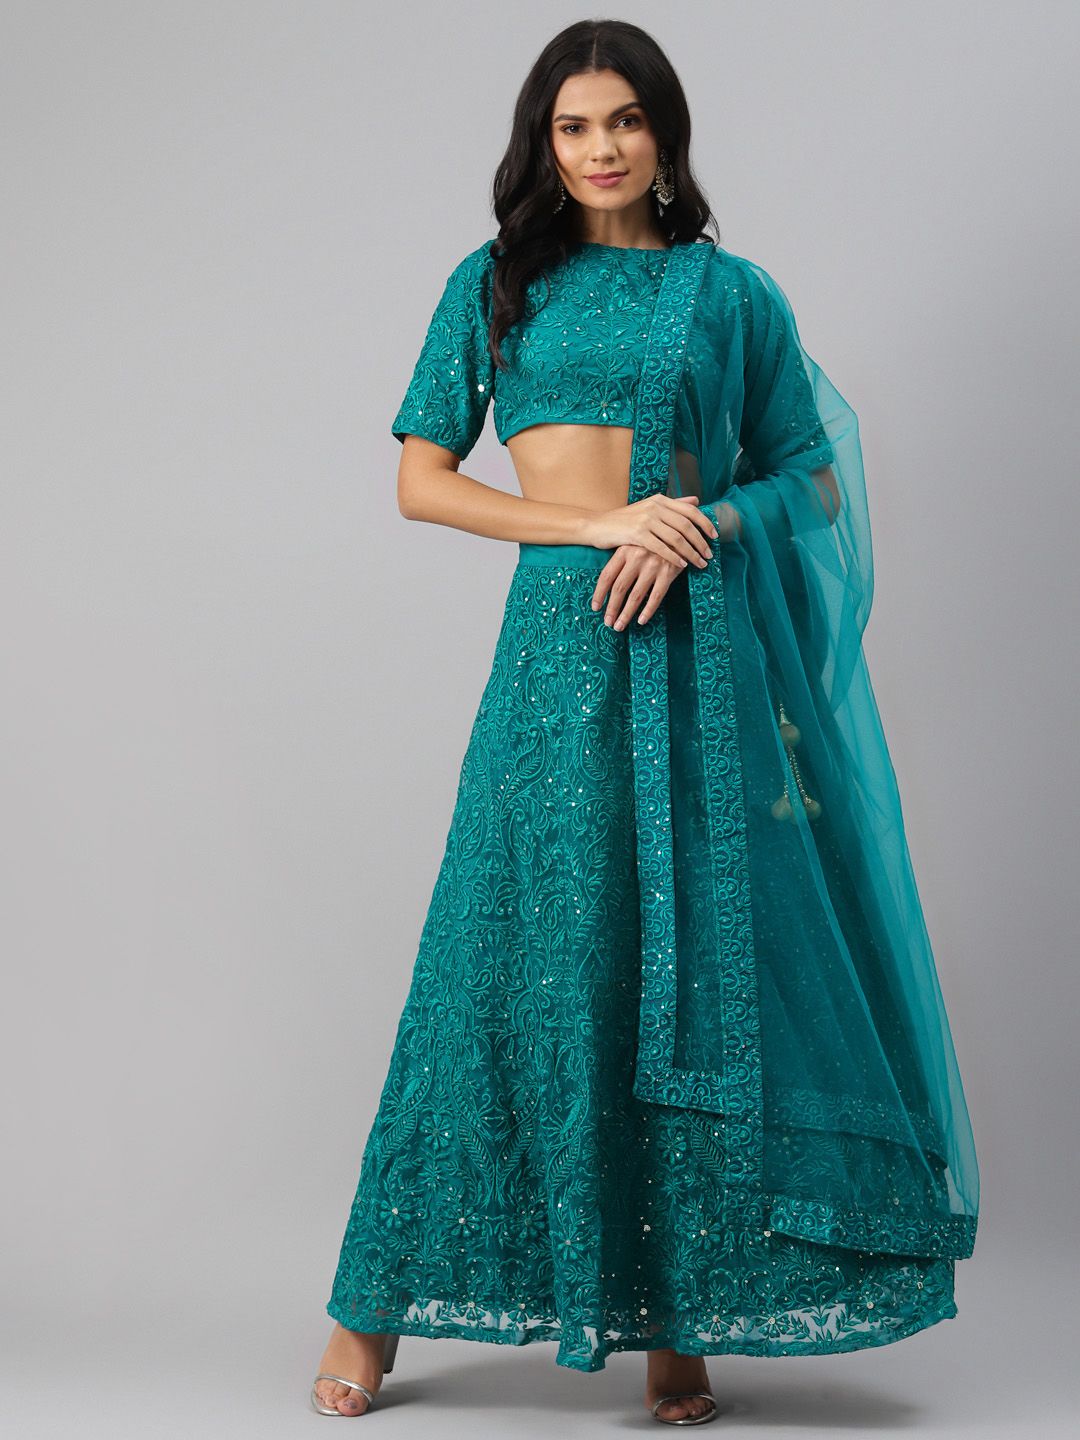 Readiprint Fashions Teal Blue Semi-Stitched Lehenga & Blouse with Dupatta Price in India